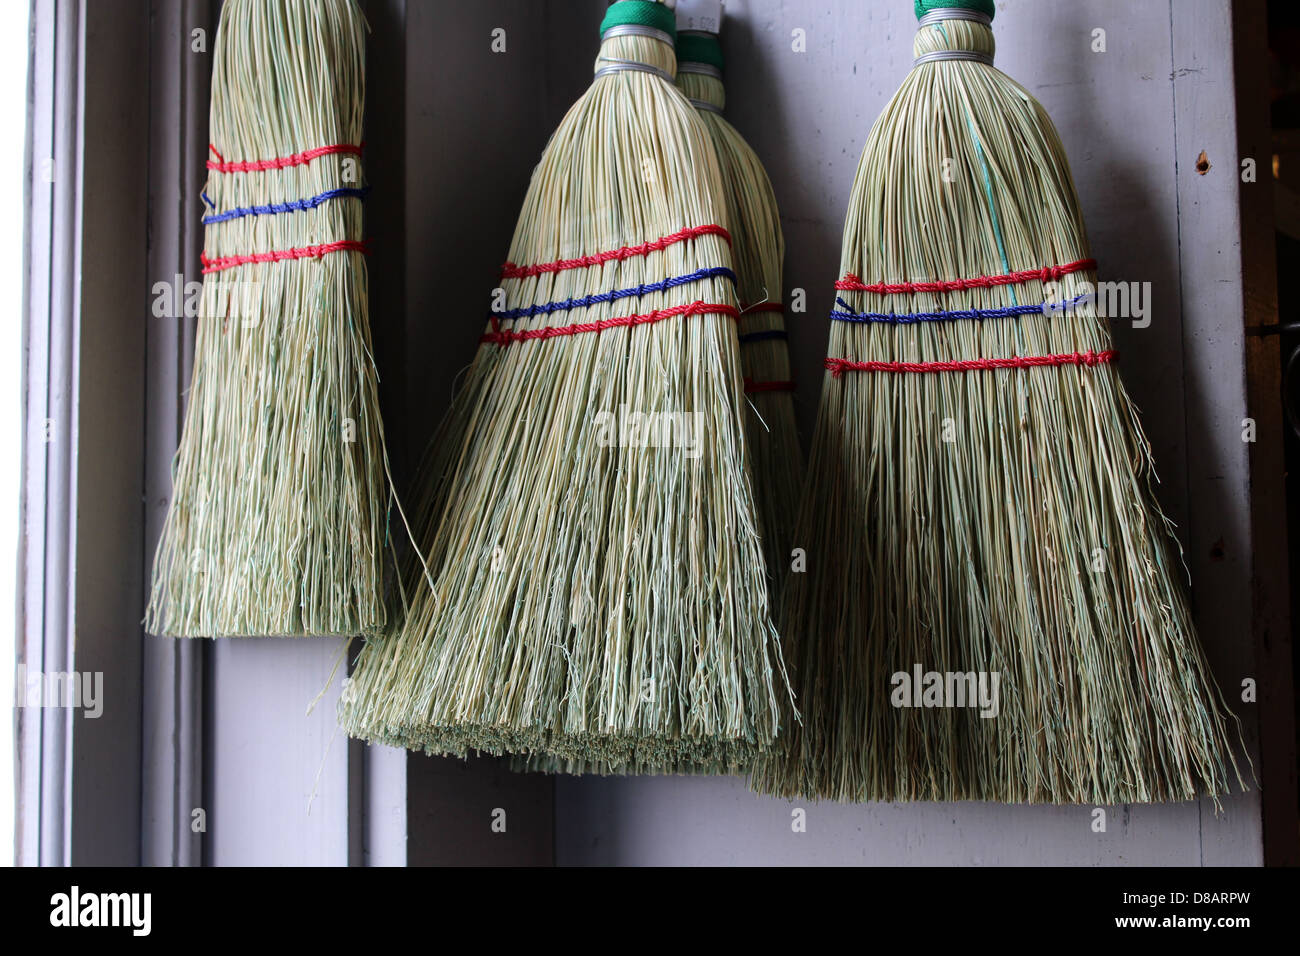 Hand made whisk brooms is an art steeped in history. Stock Photo